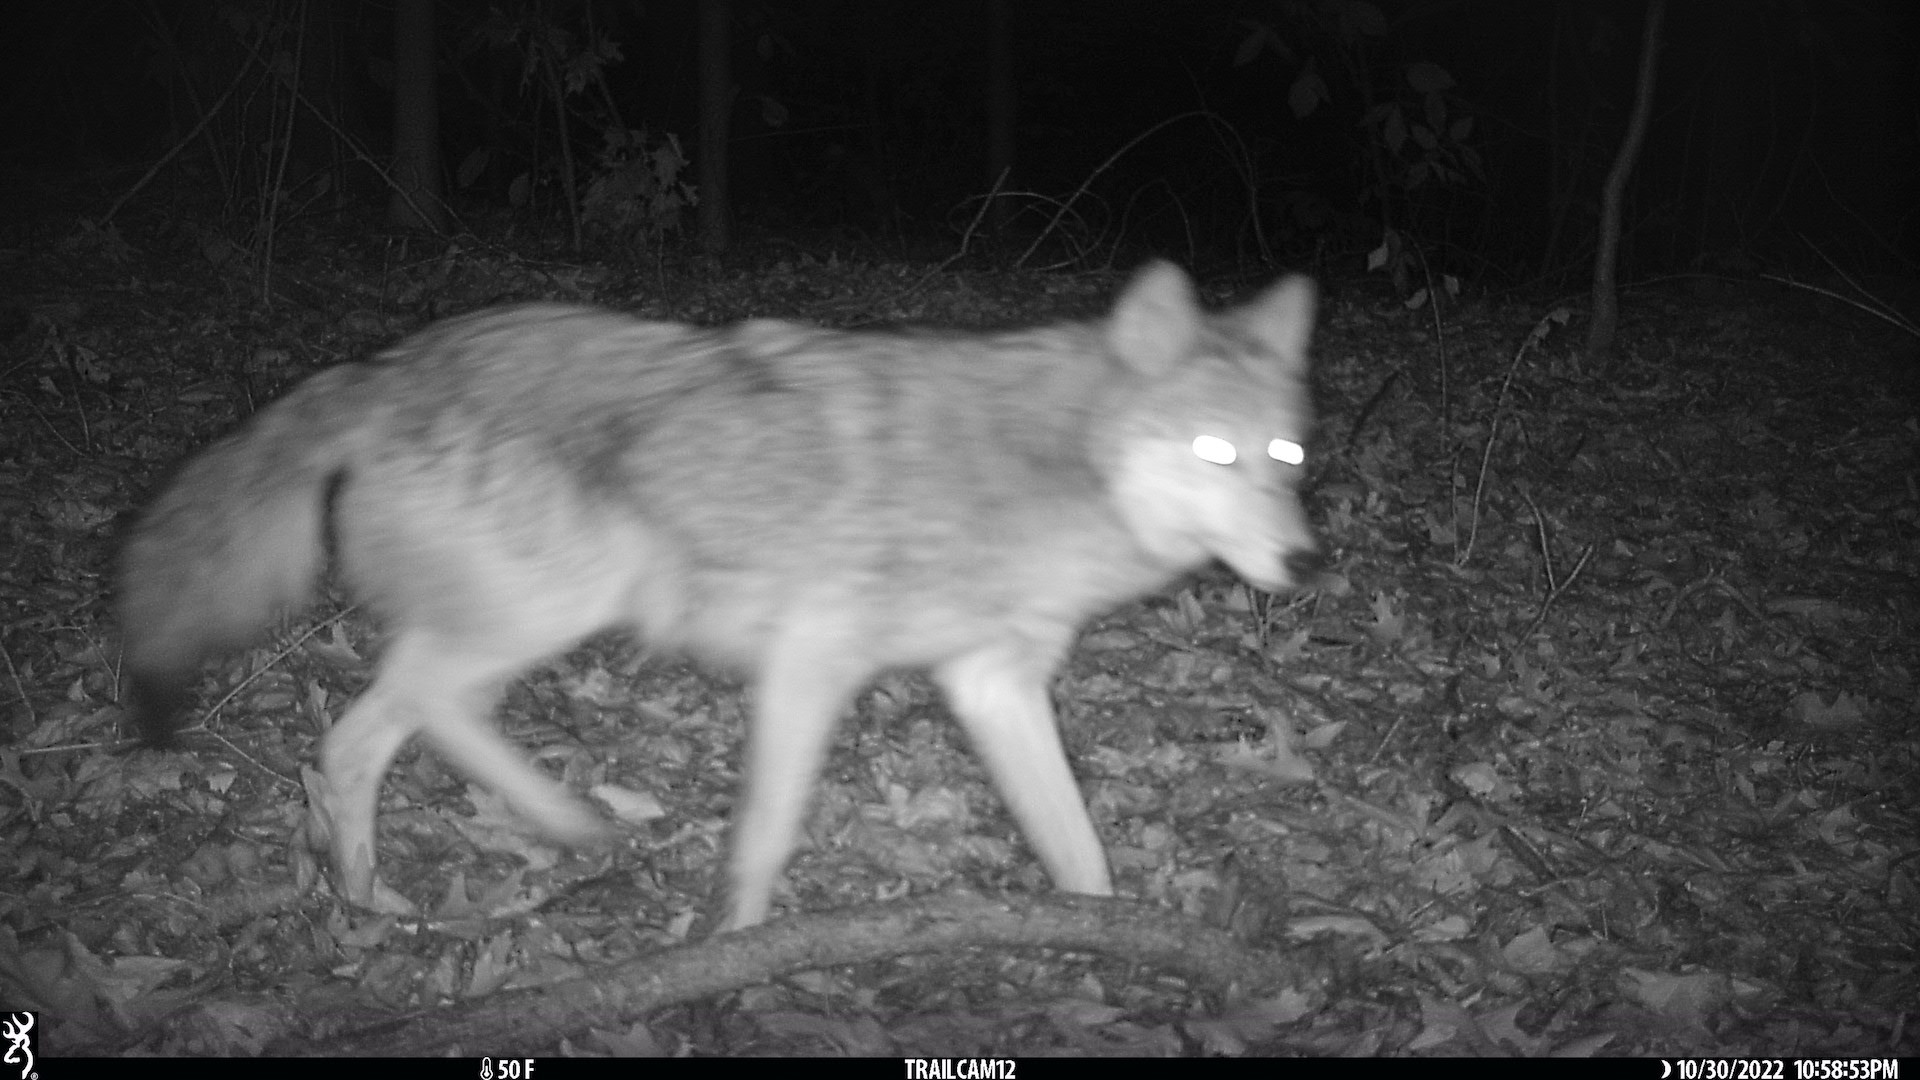 A coyote at night captured by camera trap